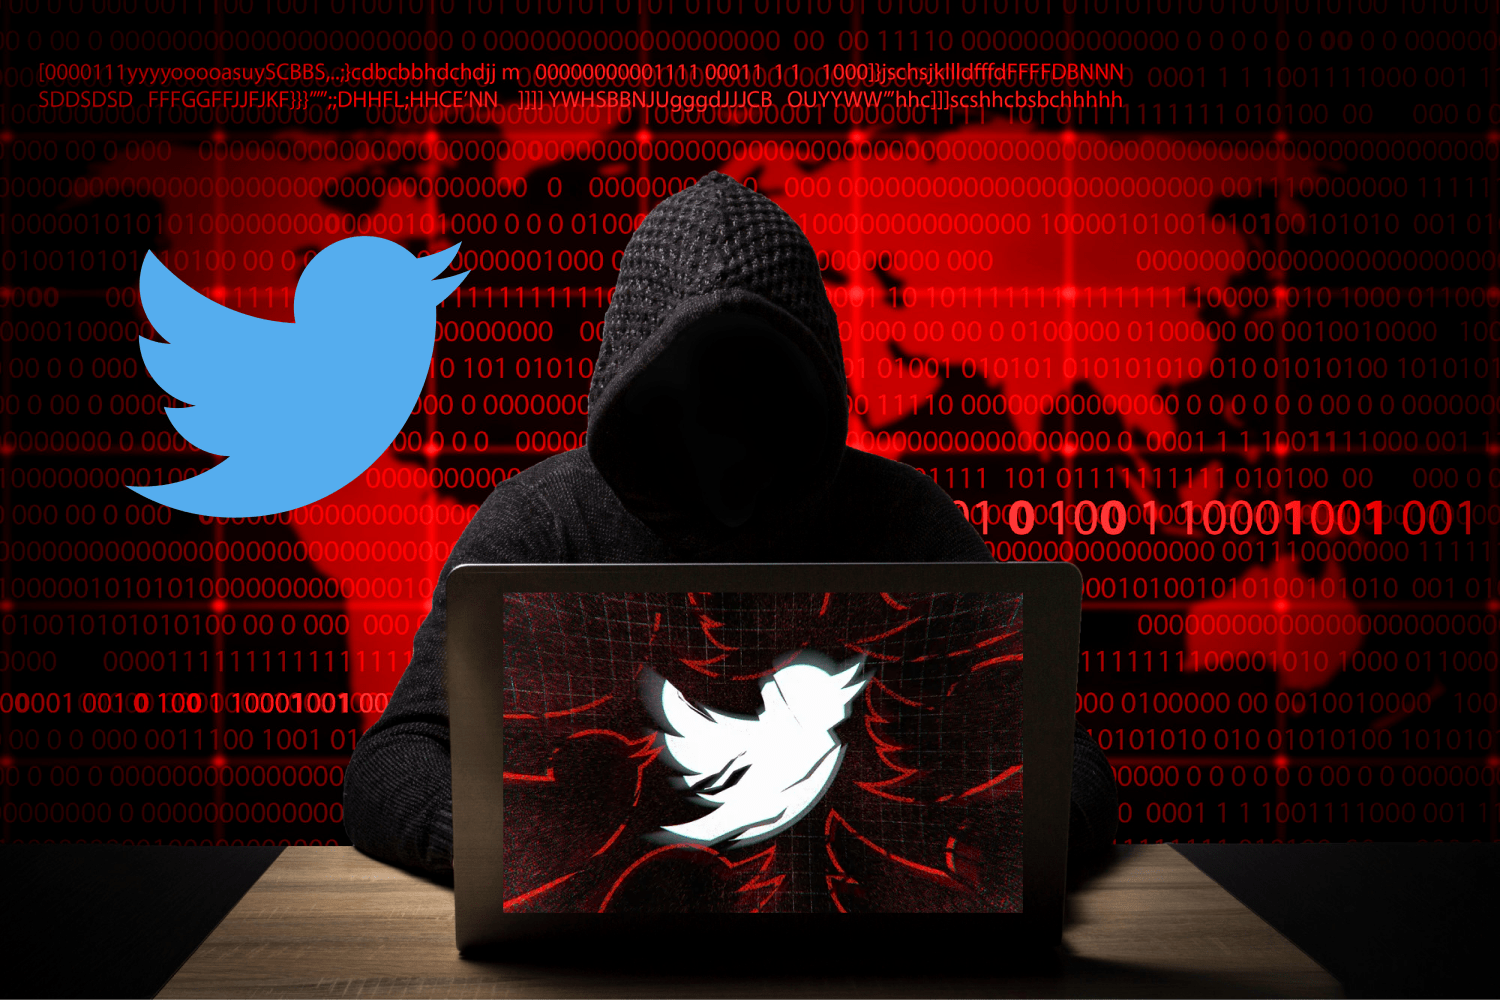 Free for Hackers - Over 5.4 million Twitter users’ stolen private data ...